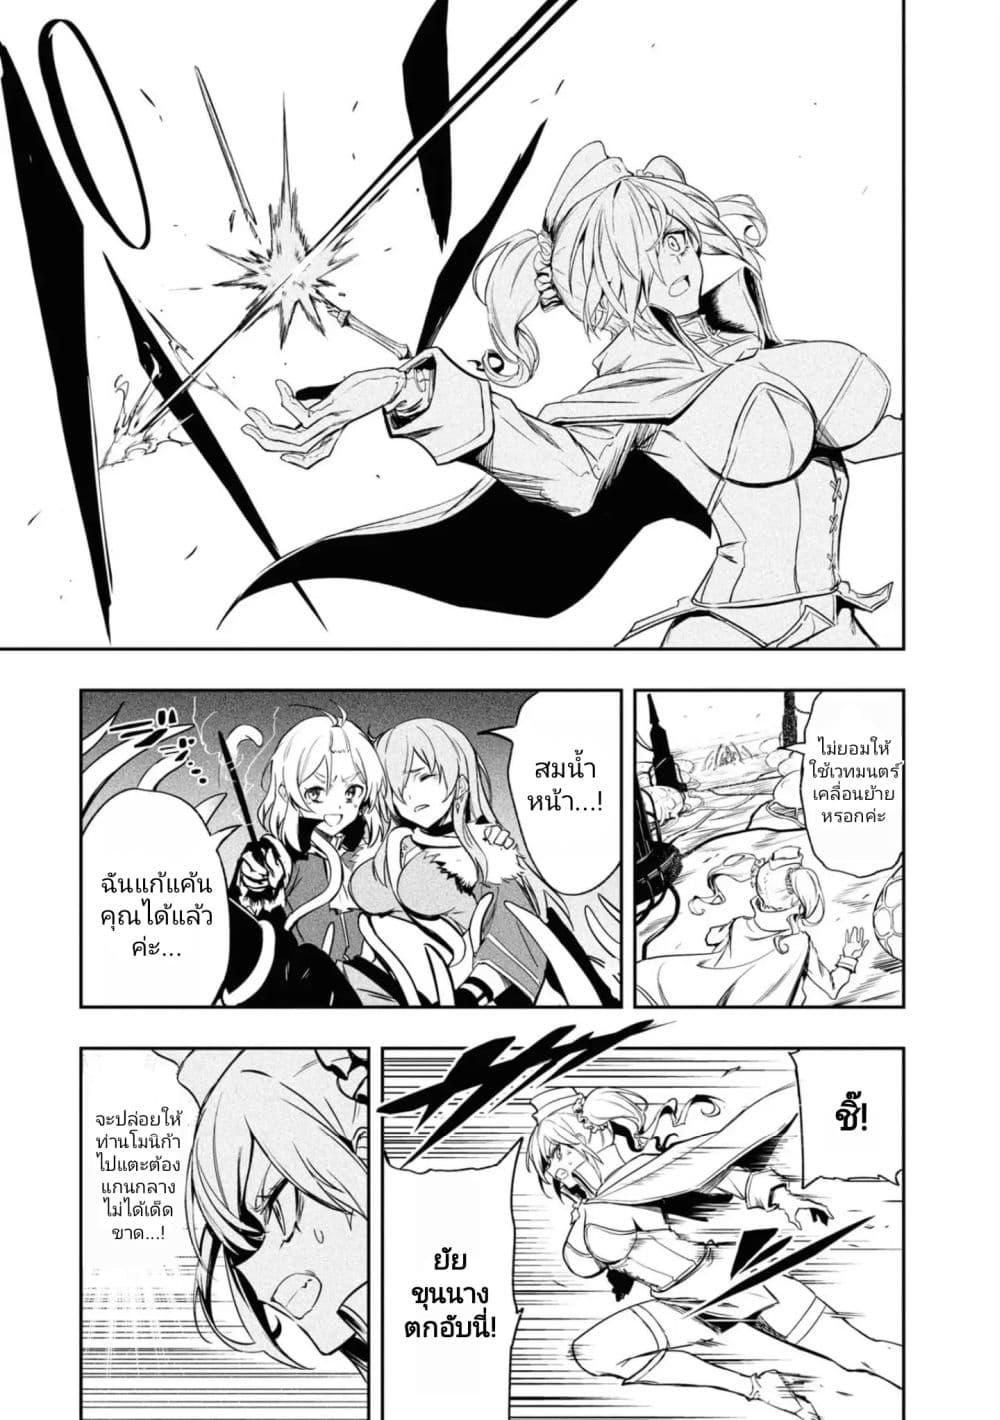 Witch Guild Fantasia 12 (20)